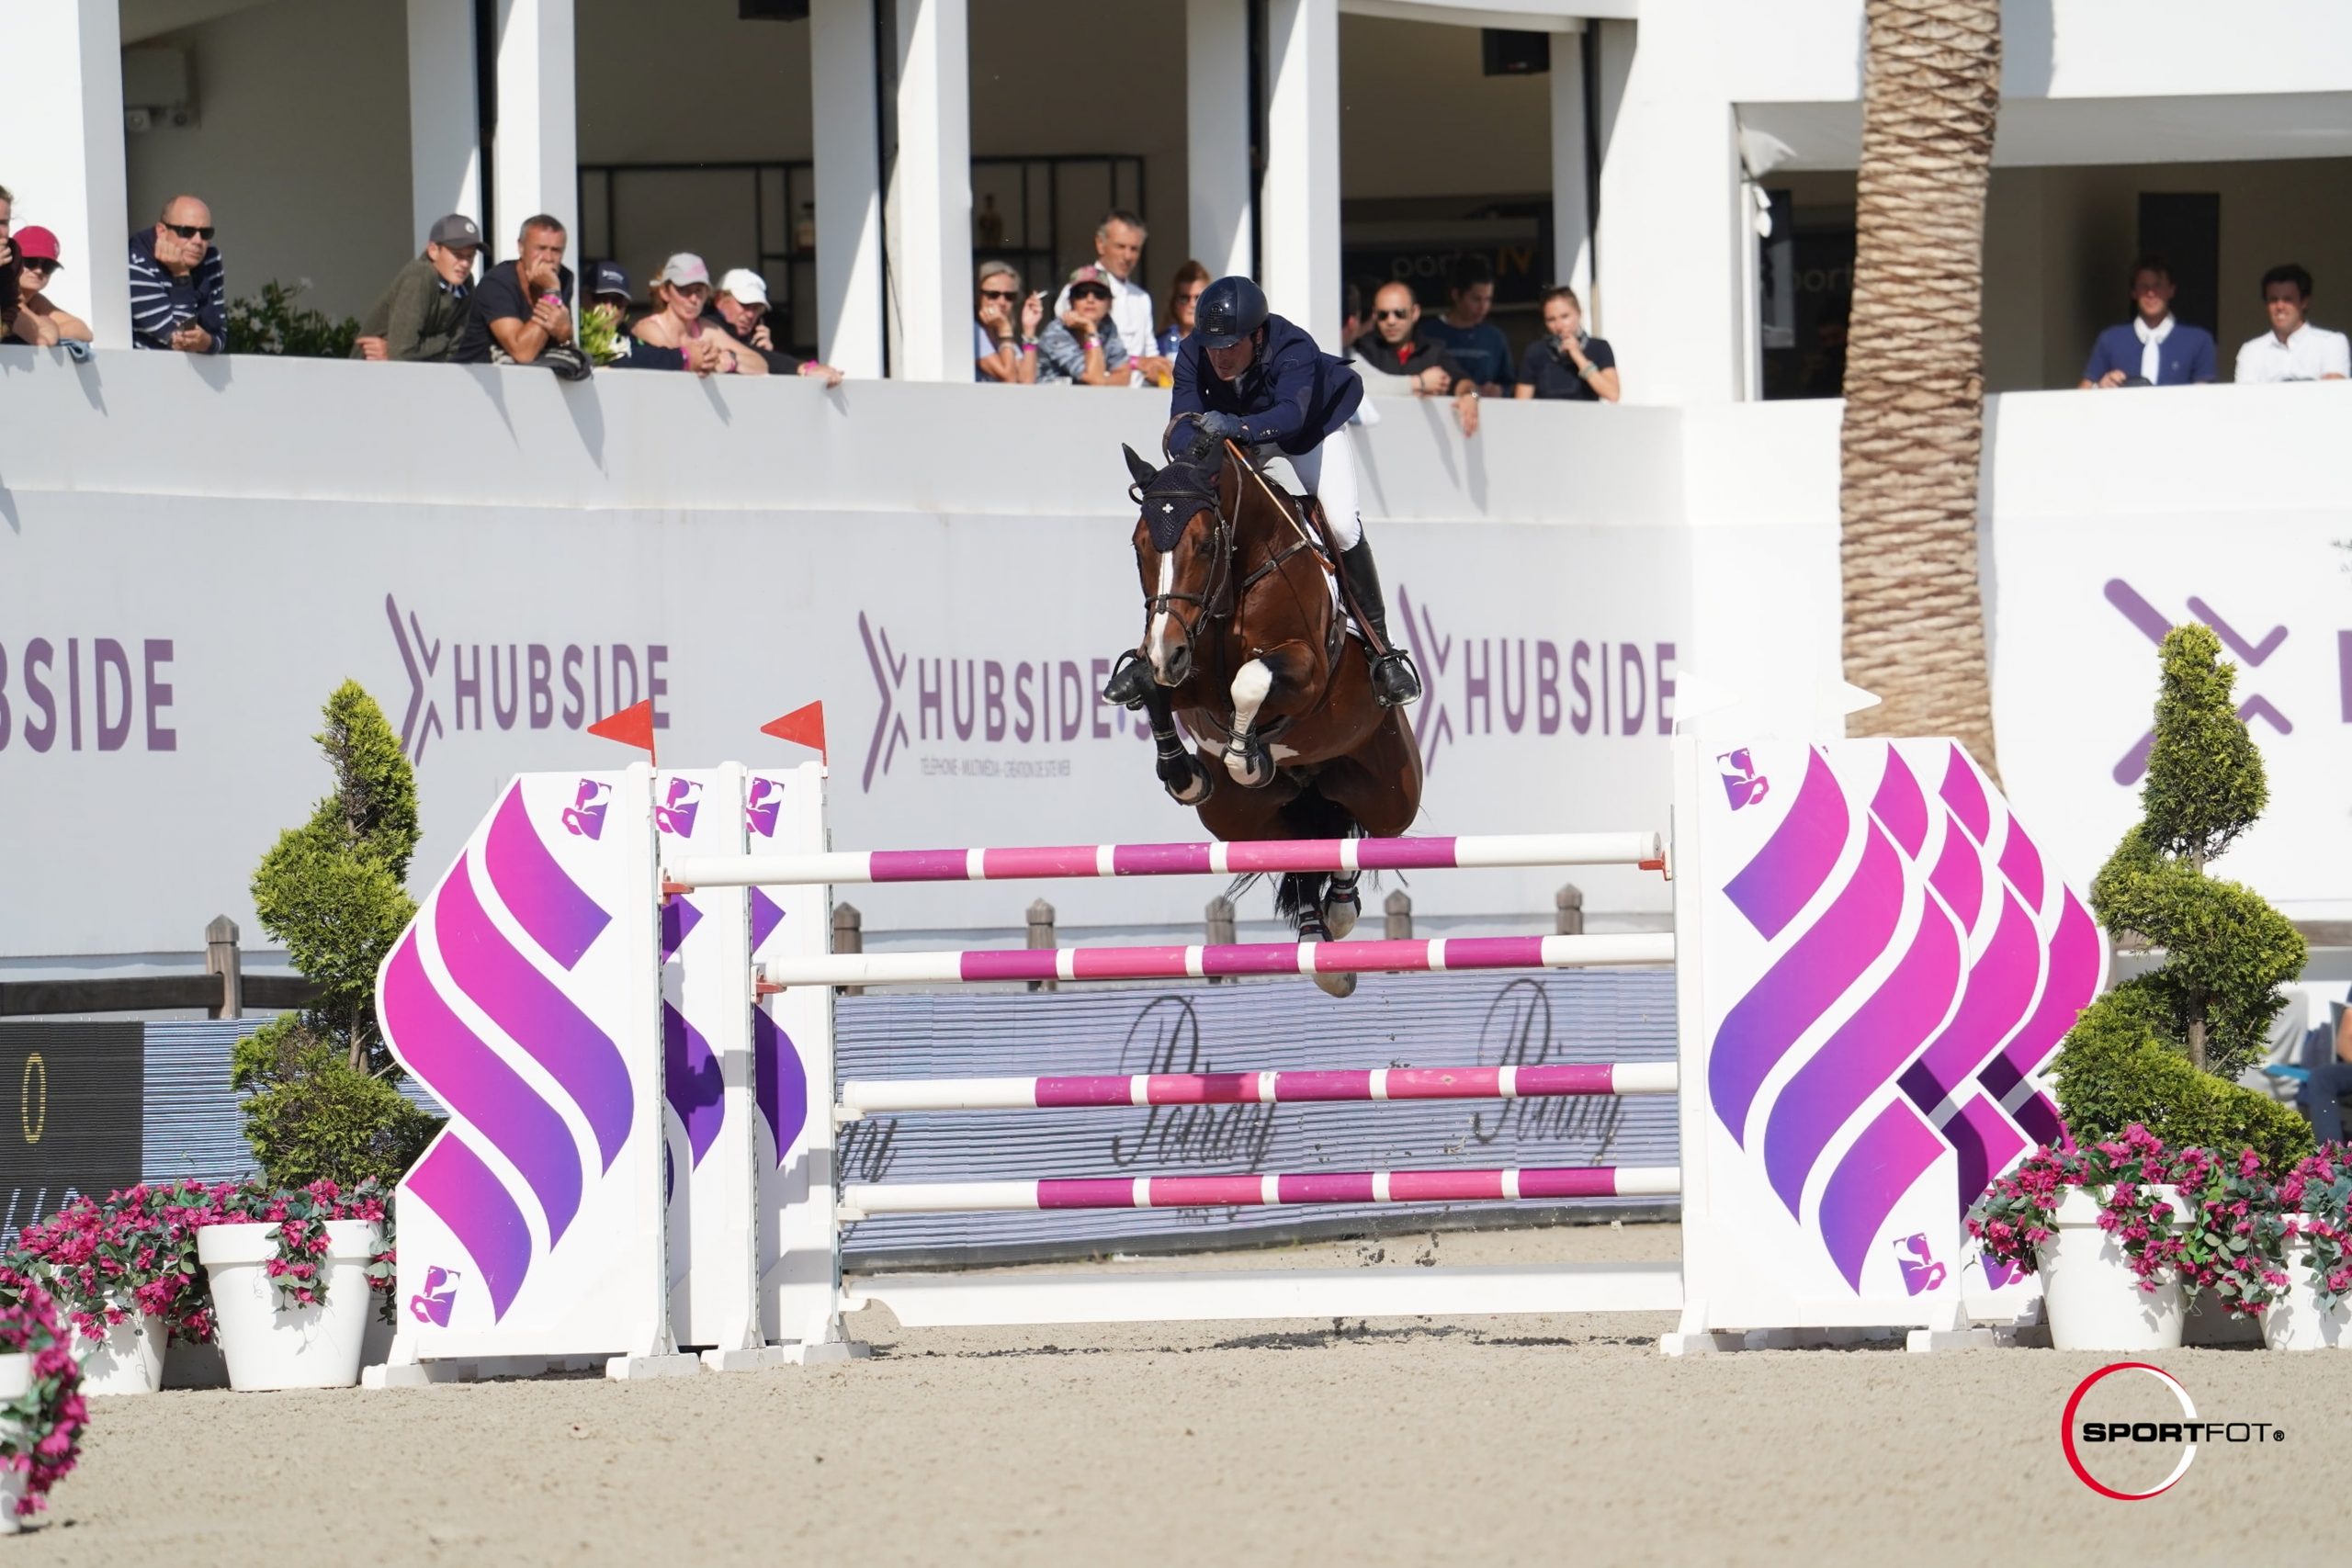 Reference Diesel GP takes the 9th place in the CSI3* 1.45m at Hubside Jumping